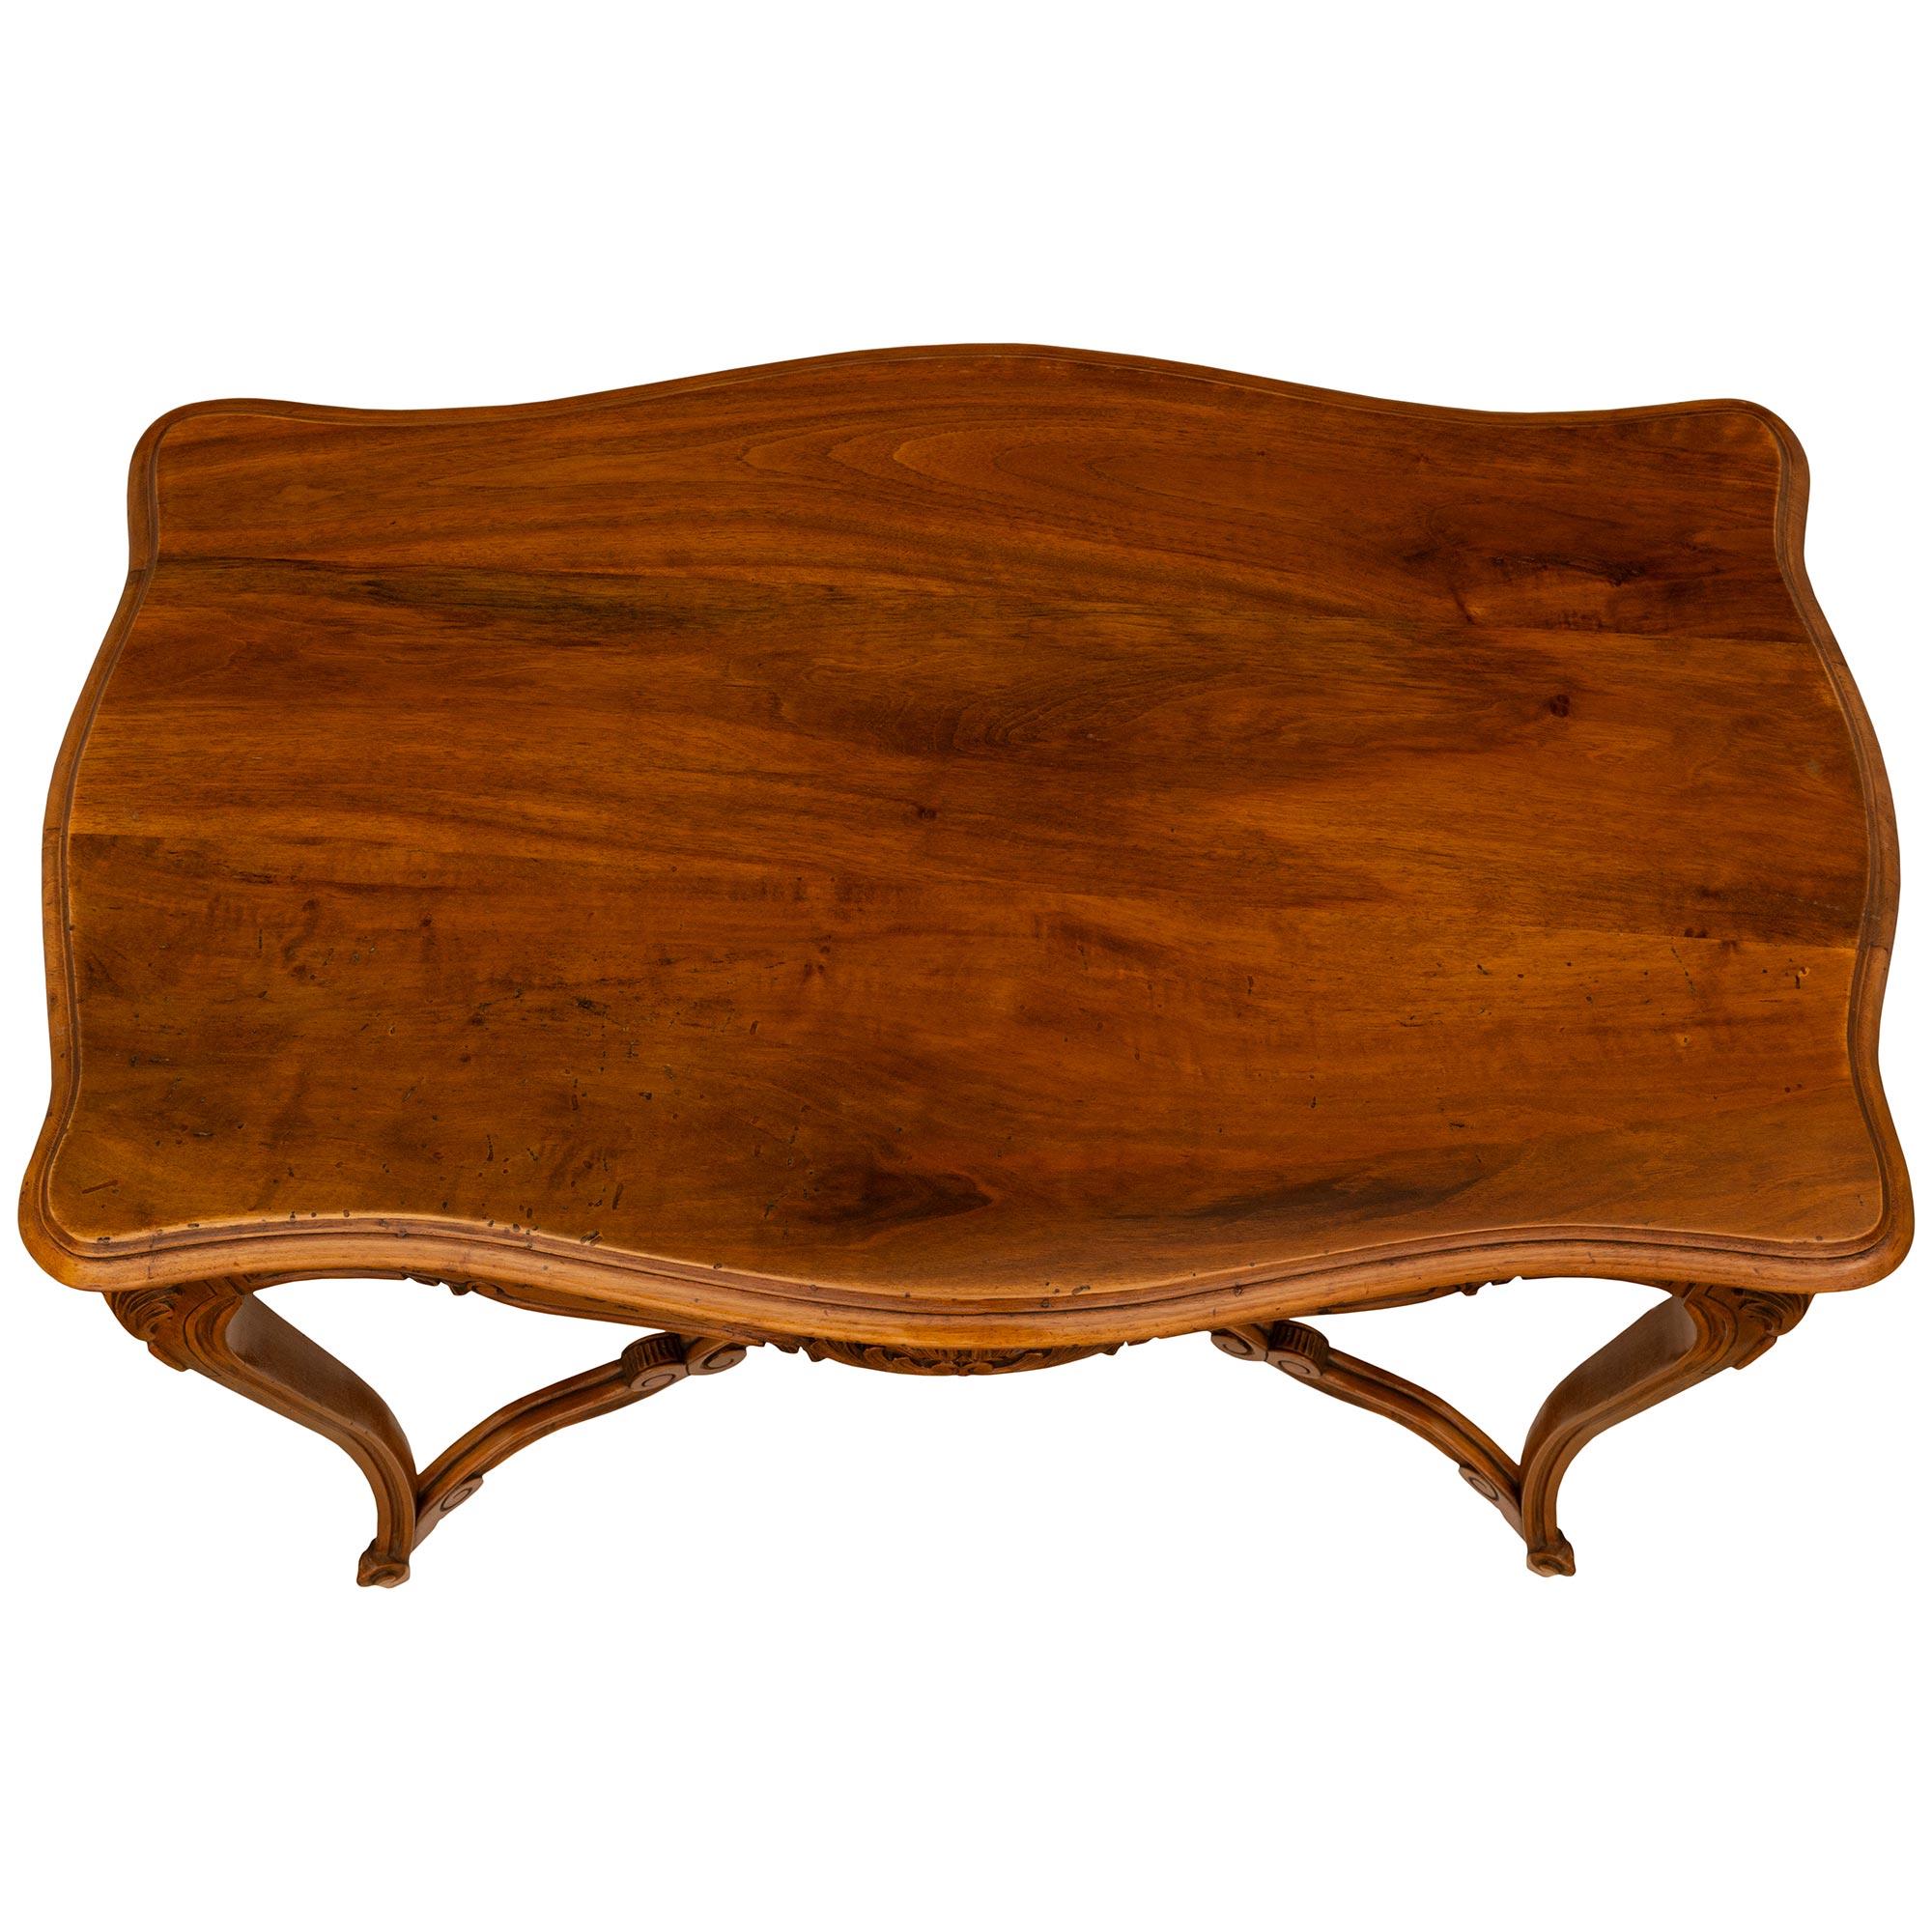 A fine 19th century Country French Louis XV st. honey colored cherry wood side table. The table is raised on carbiole legs topped with acanthus leaf carvings. The legs are joined by scrolled X stretcher centered by an urn with finial. At the